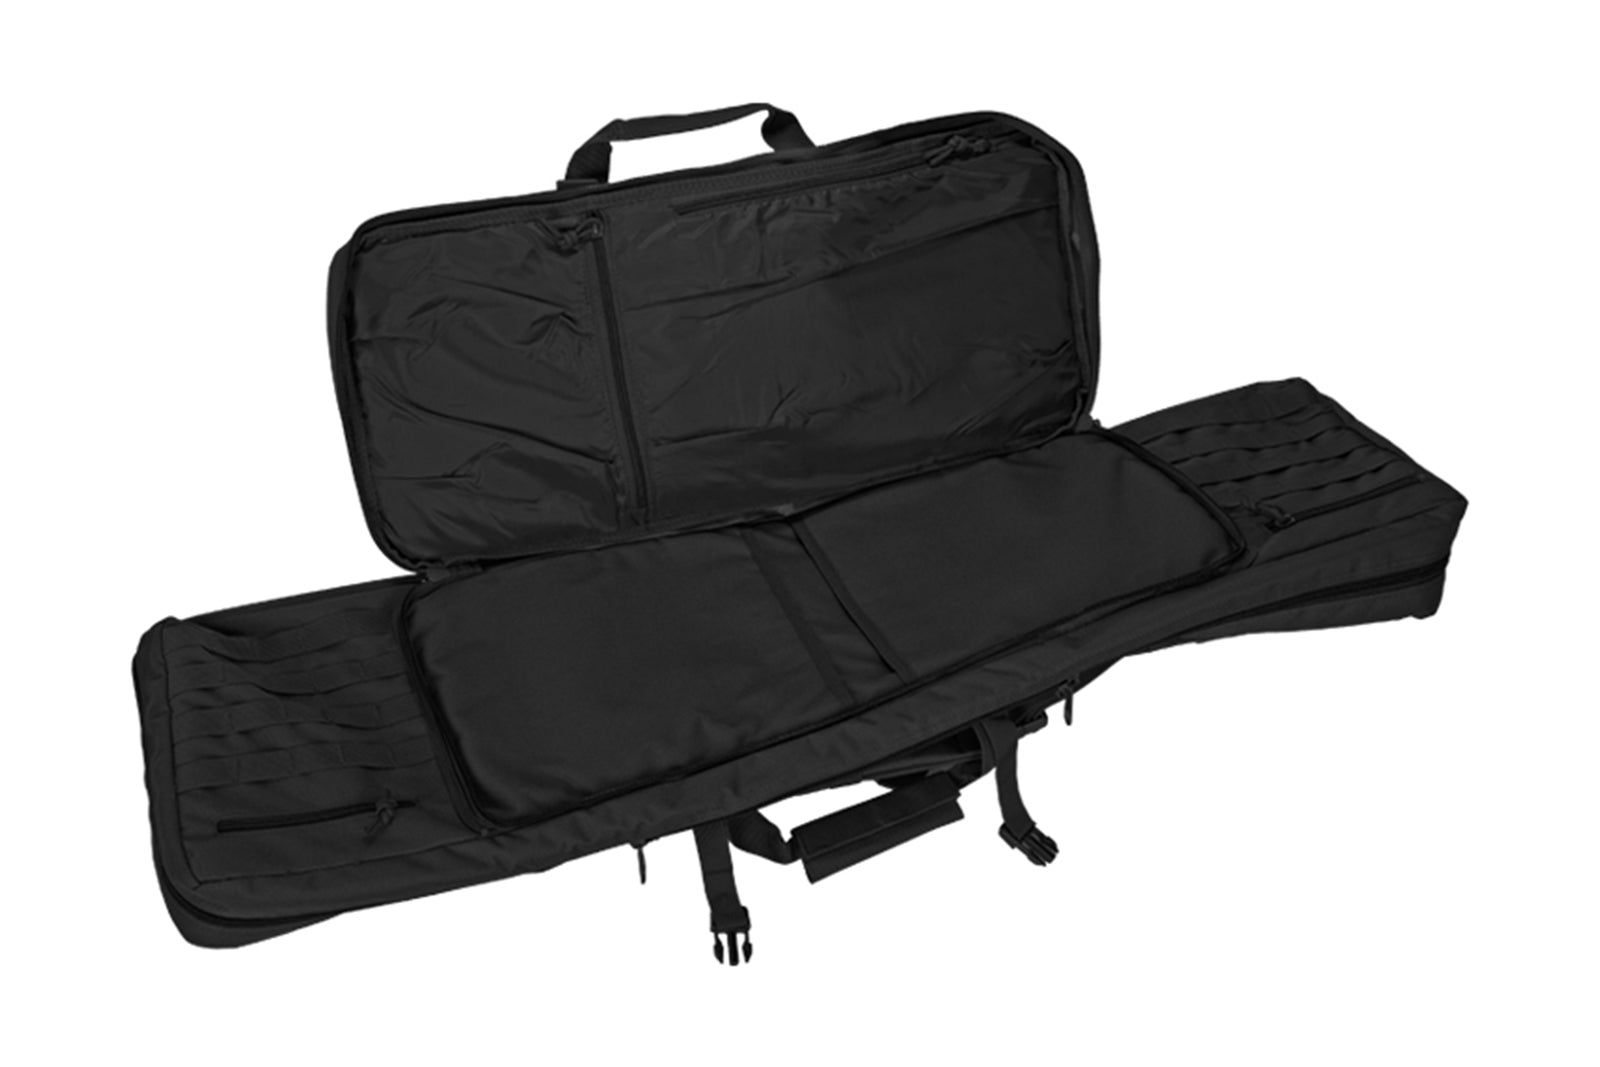 Lancer Tactical 42" Molle Ultimate Dual Weapon Case Rifle Bag